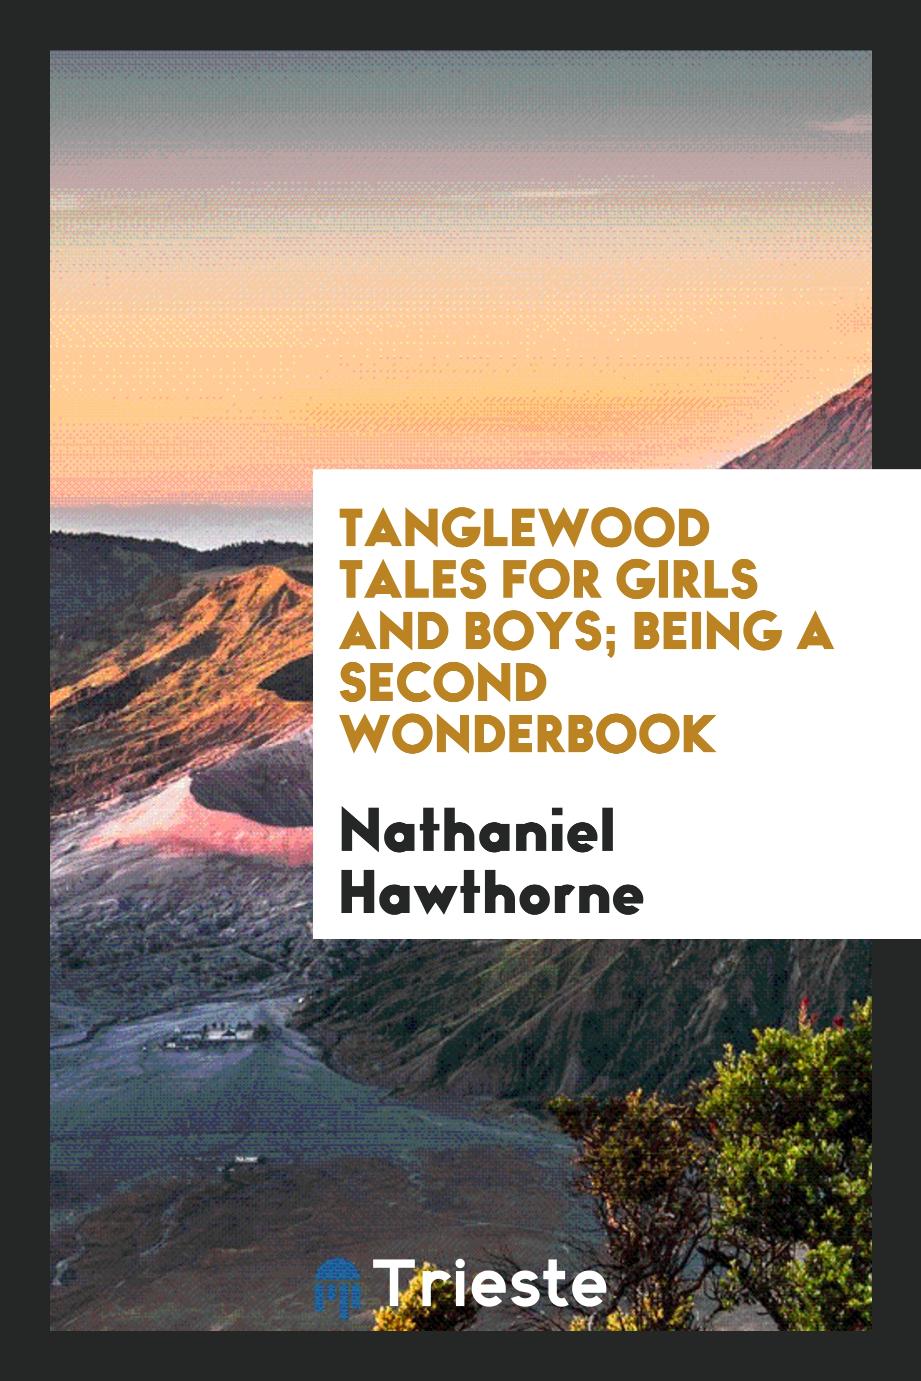 Tanglewood tales for girls and boys; being a second Wonderbook